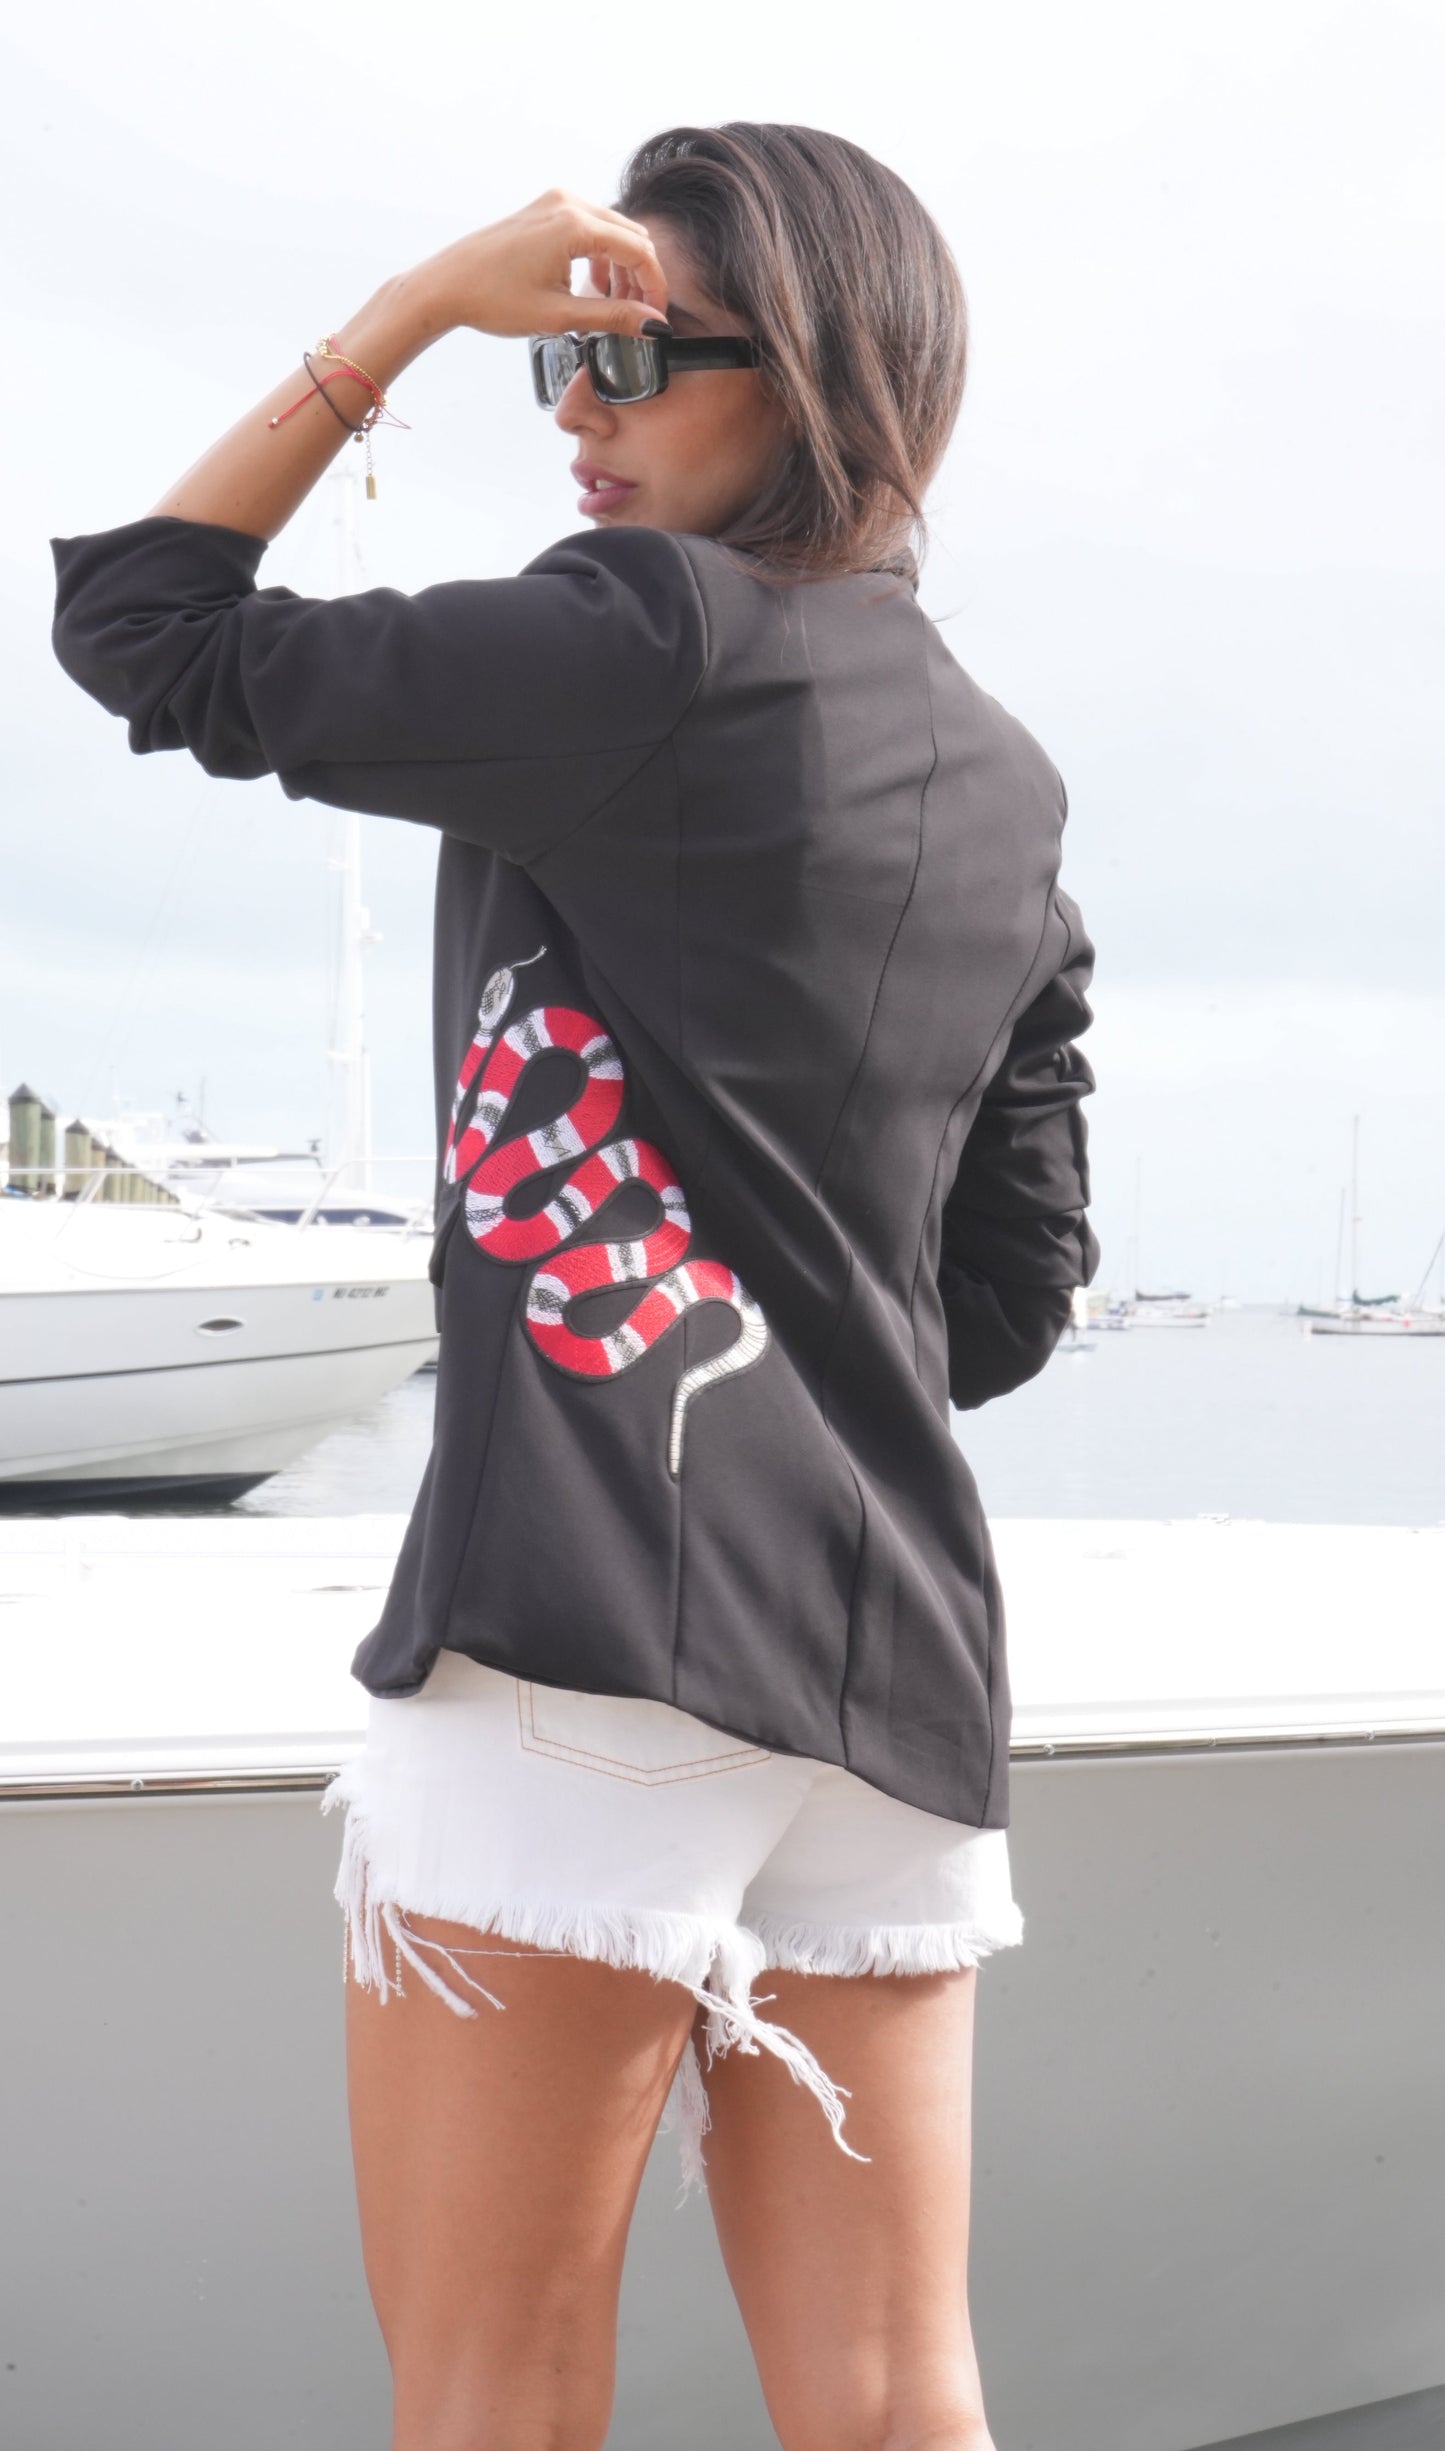 Blazer, Ruched Black, Red Snakes